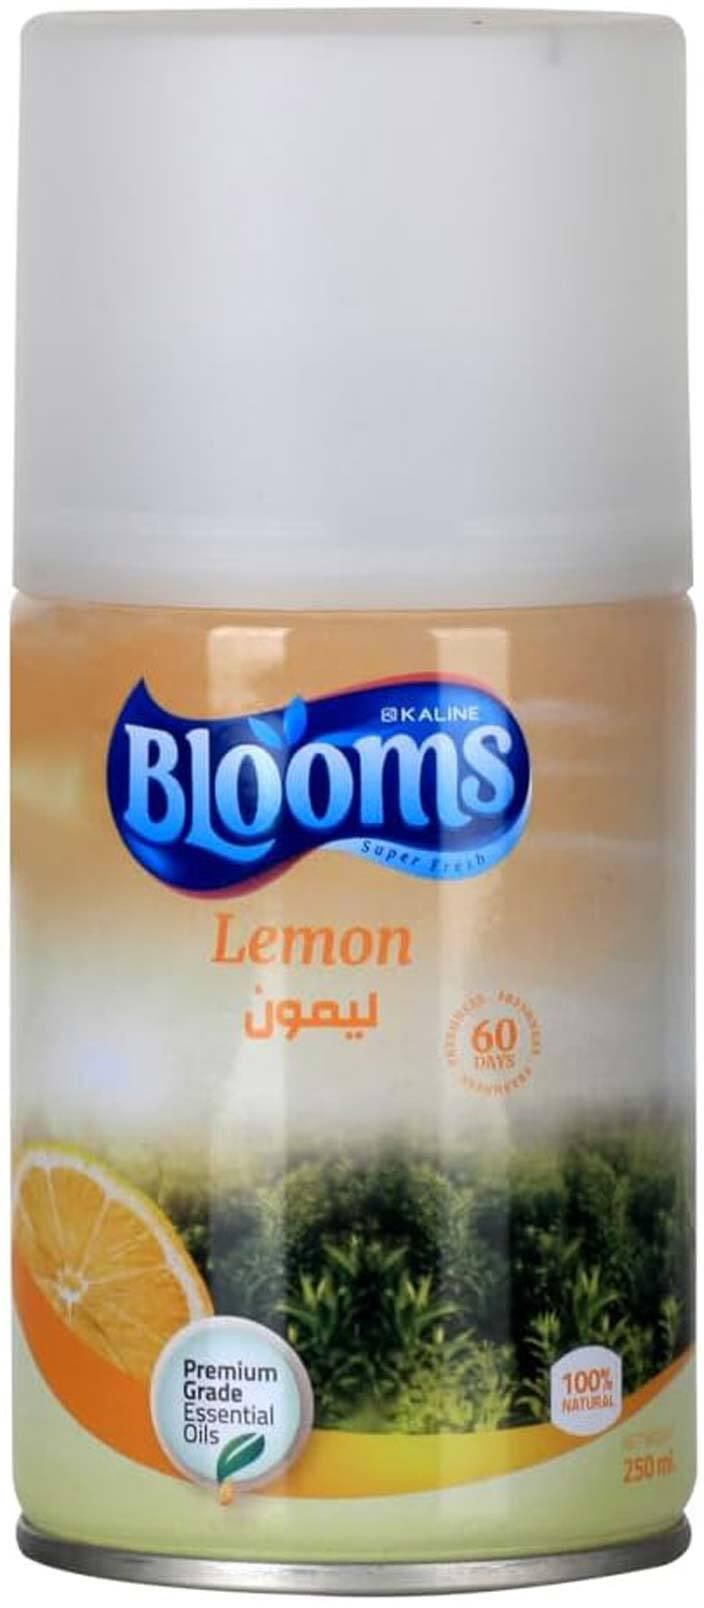 Blooms Air Freshener Replacement with Lemon Scent - 250 ml